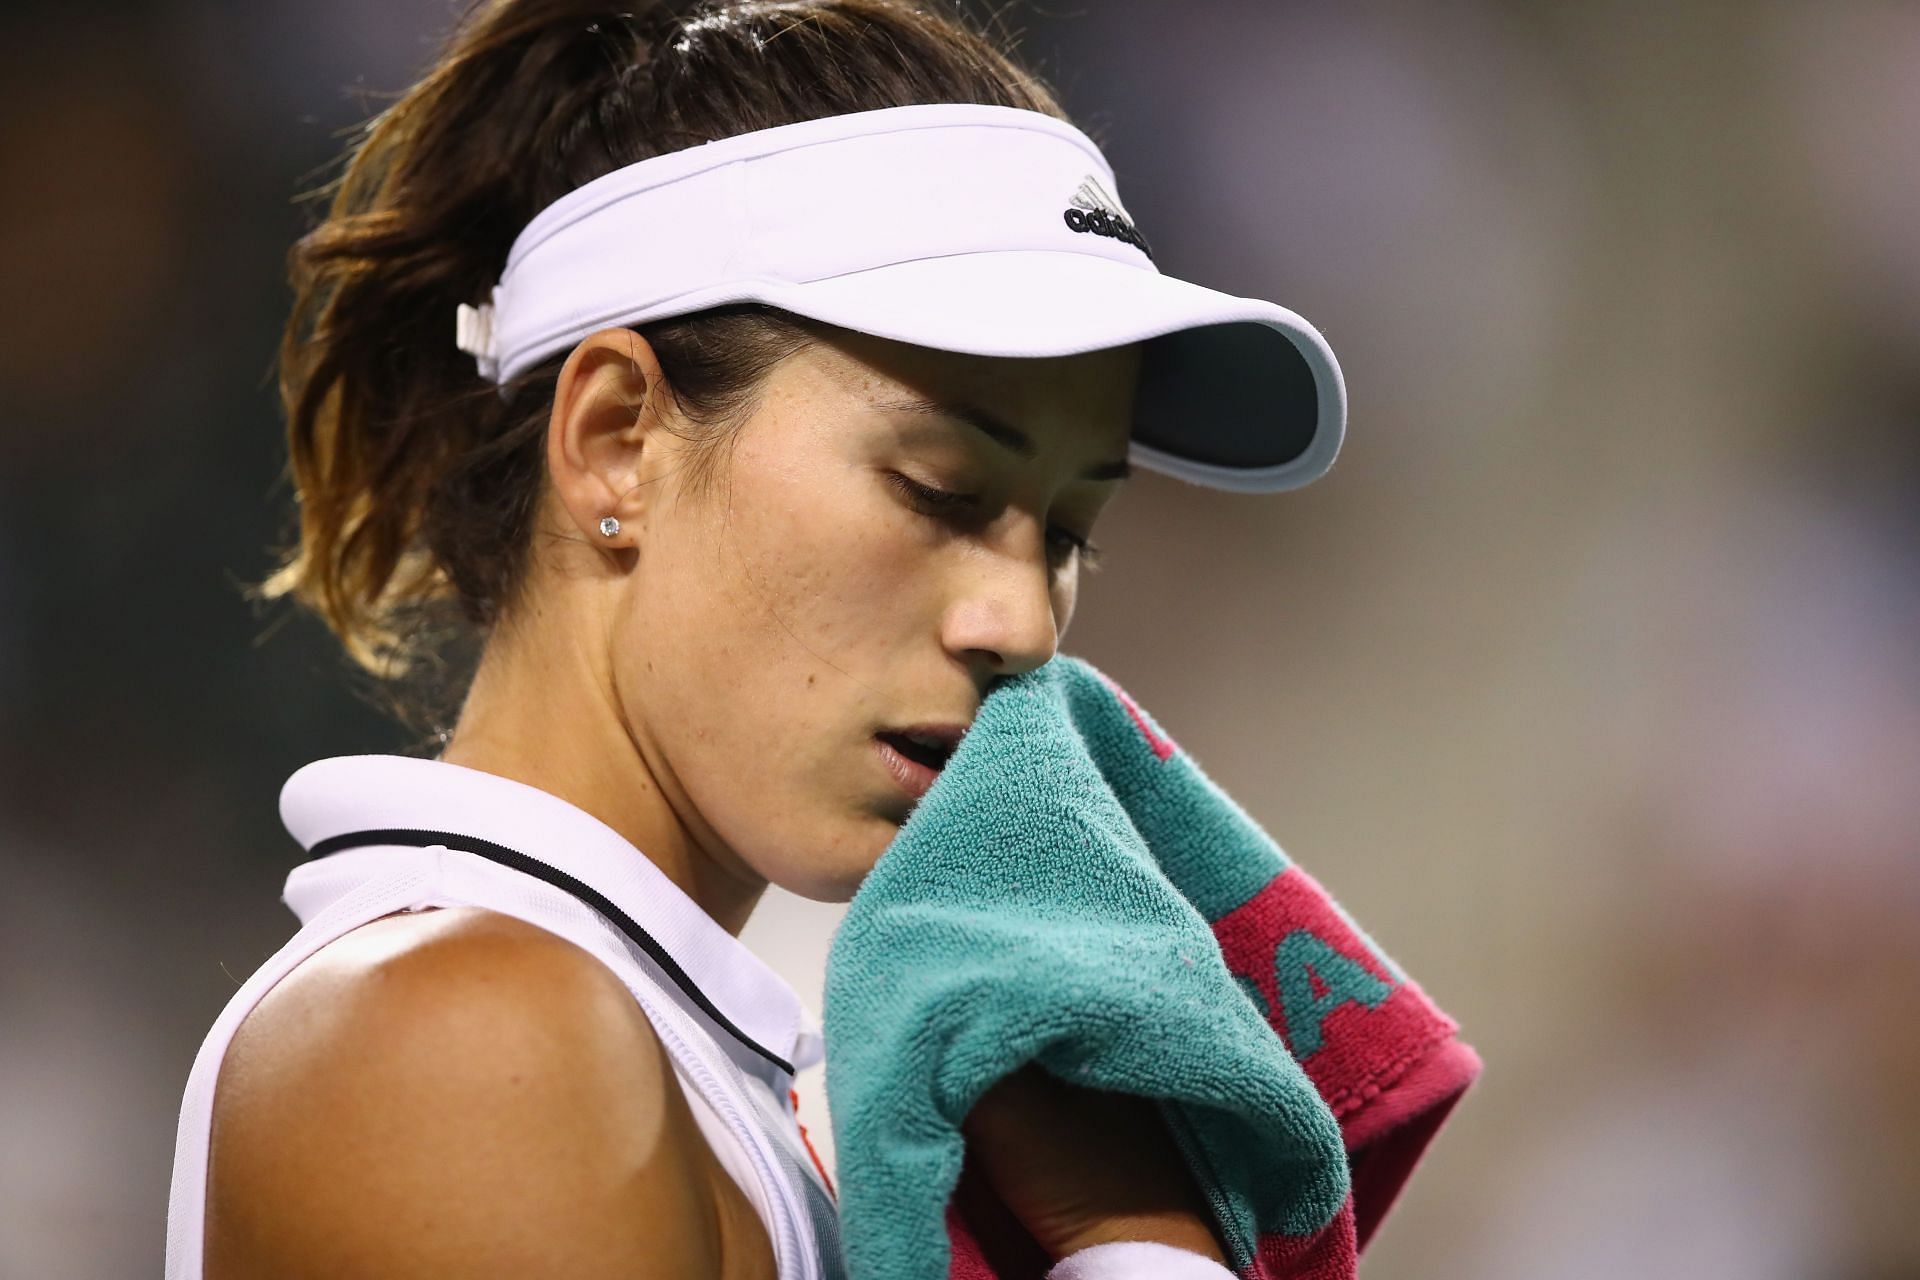 Paula Badosa spoke in detail about Garbine Muguruza&#039;s (in pic) absence from the Tour.